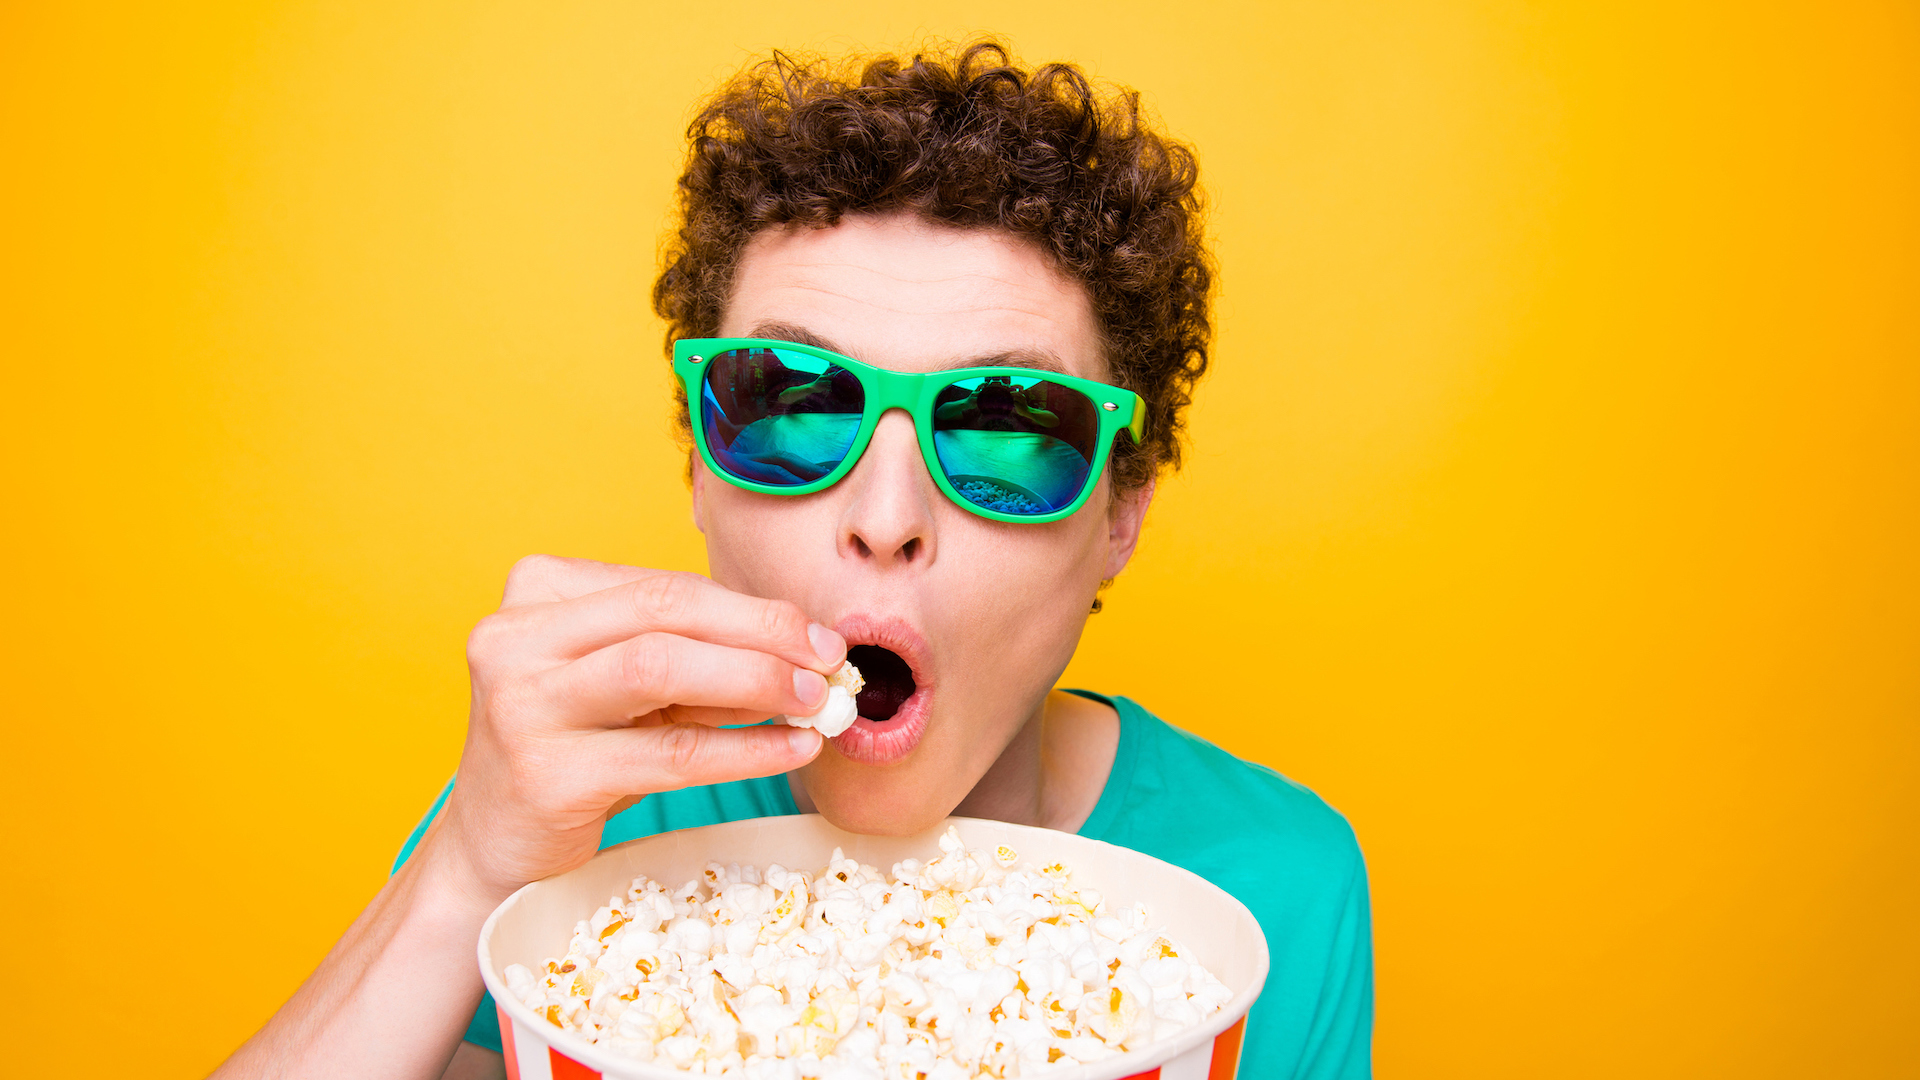 A person in sunglasses eating popcorn